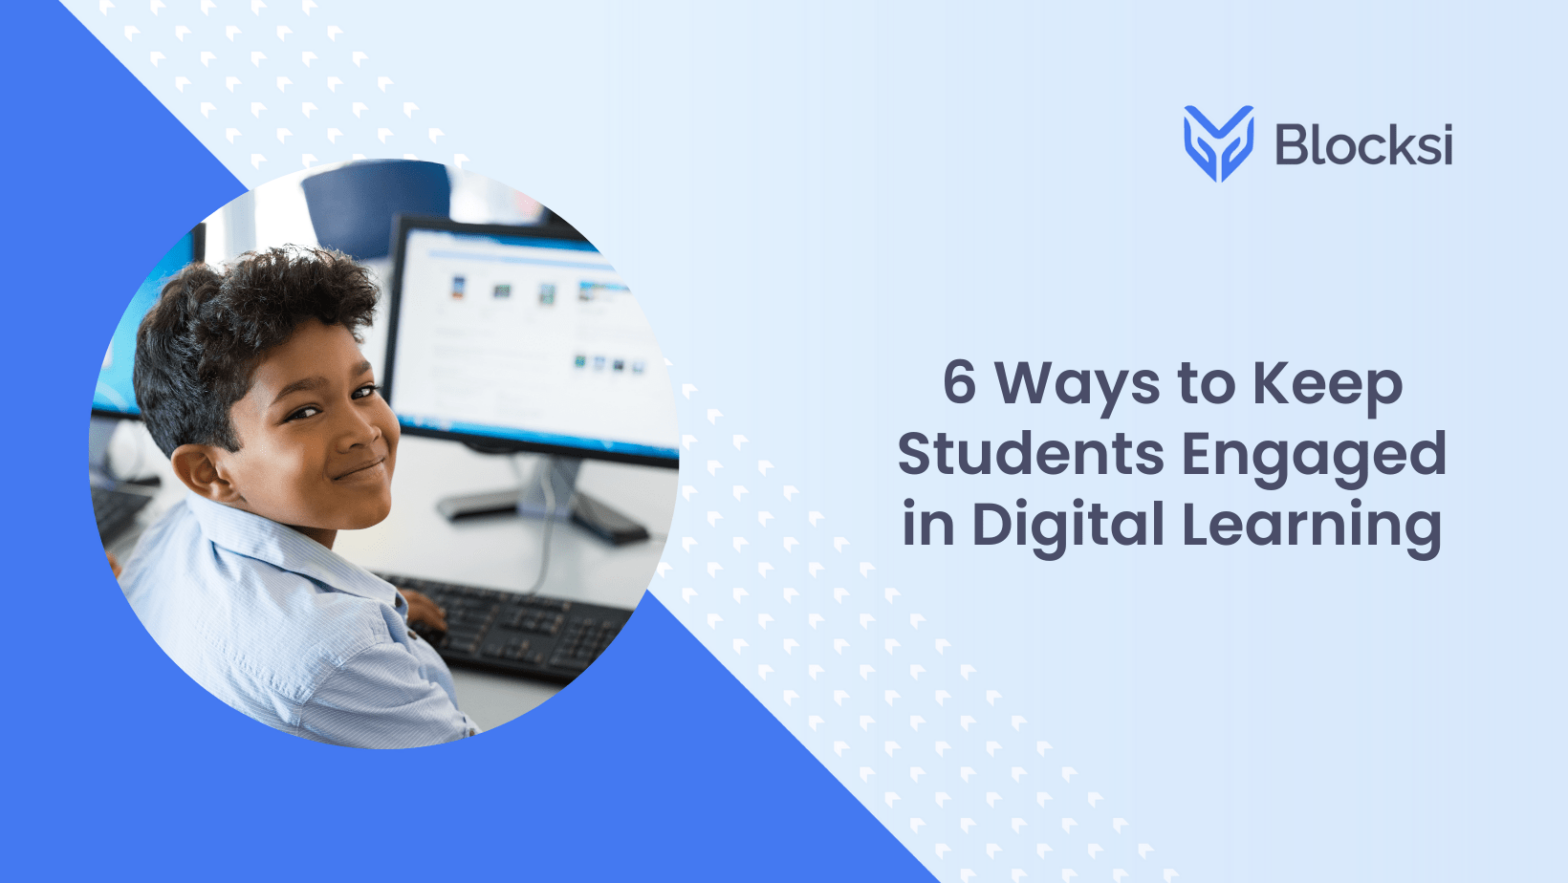 6 Ways to Keep Students Engaged in Digital Learning